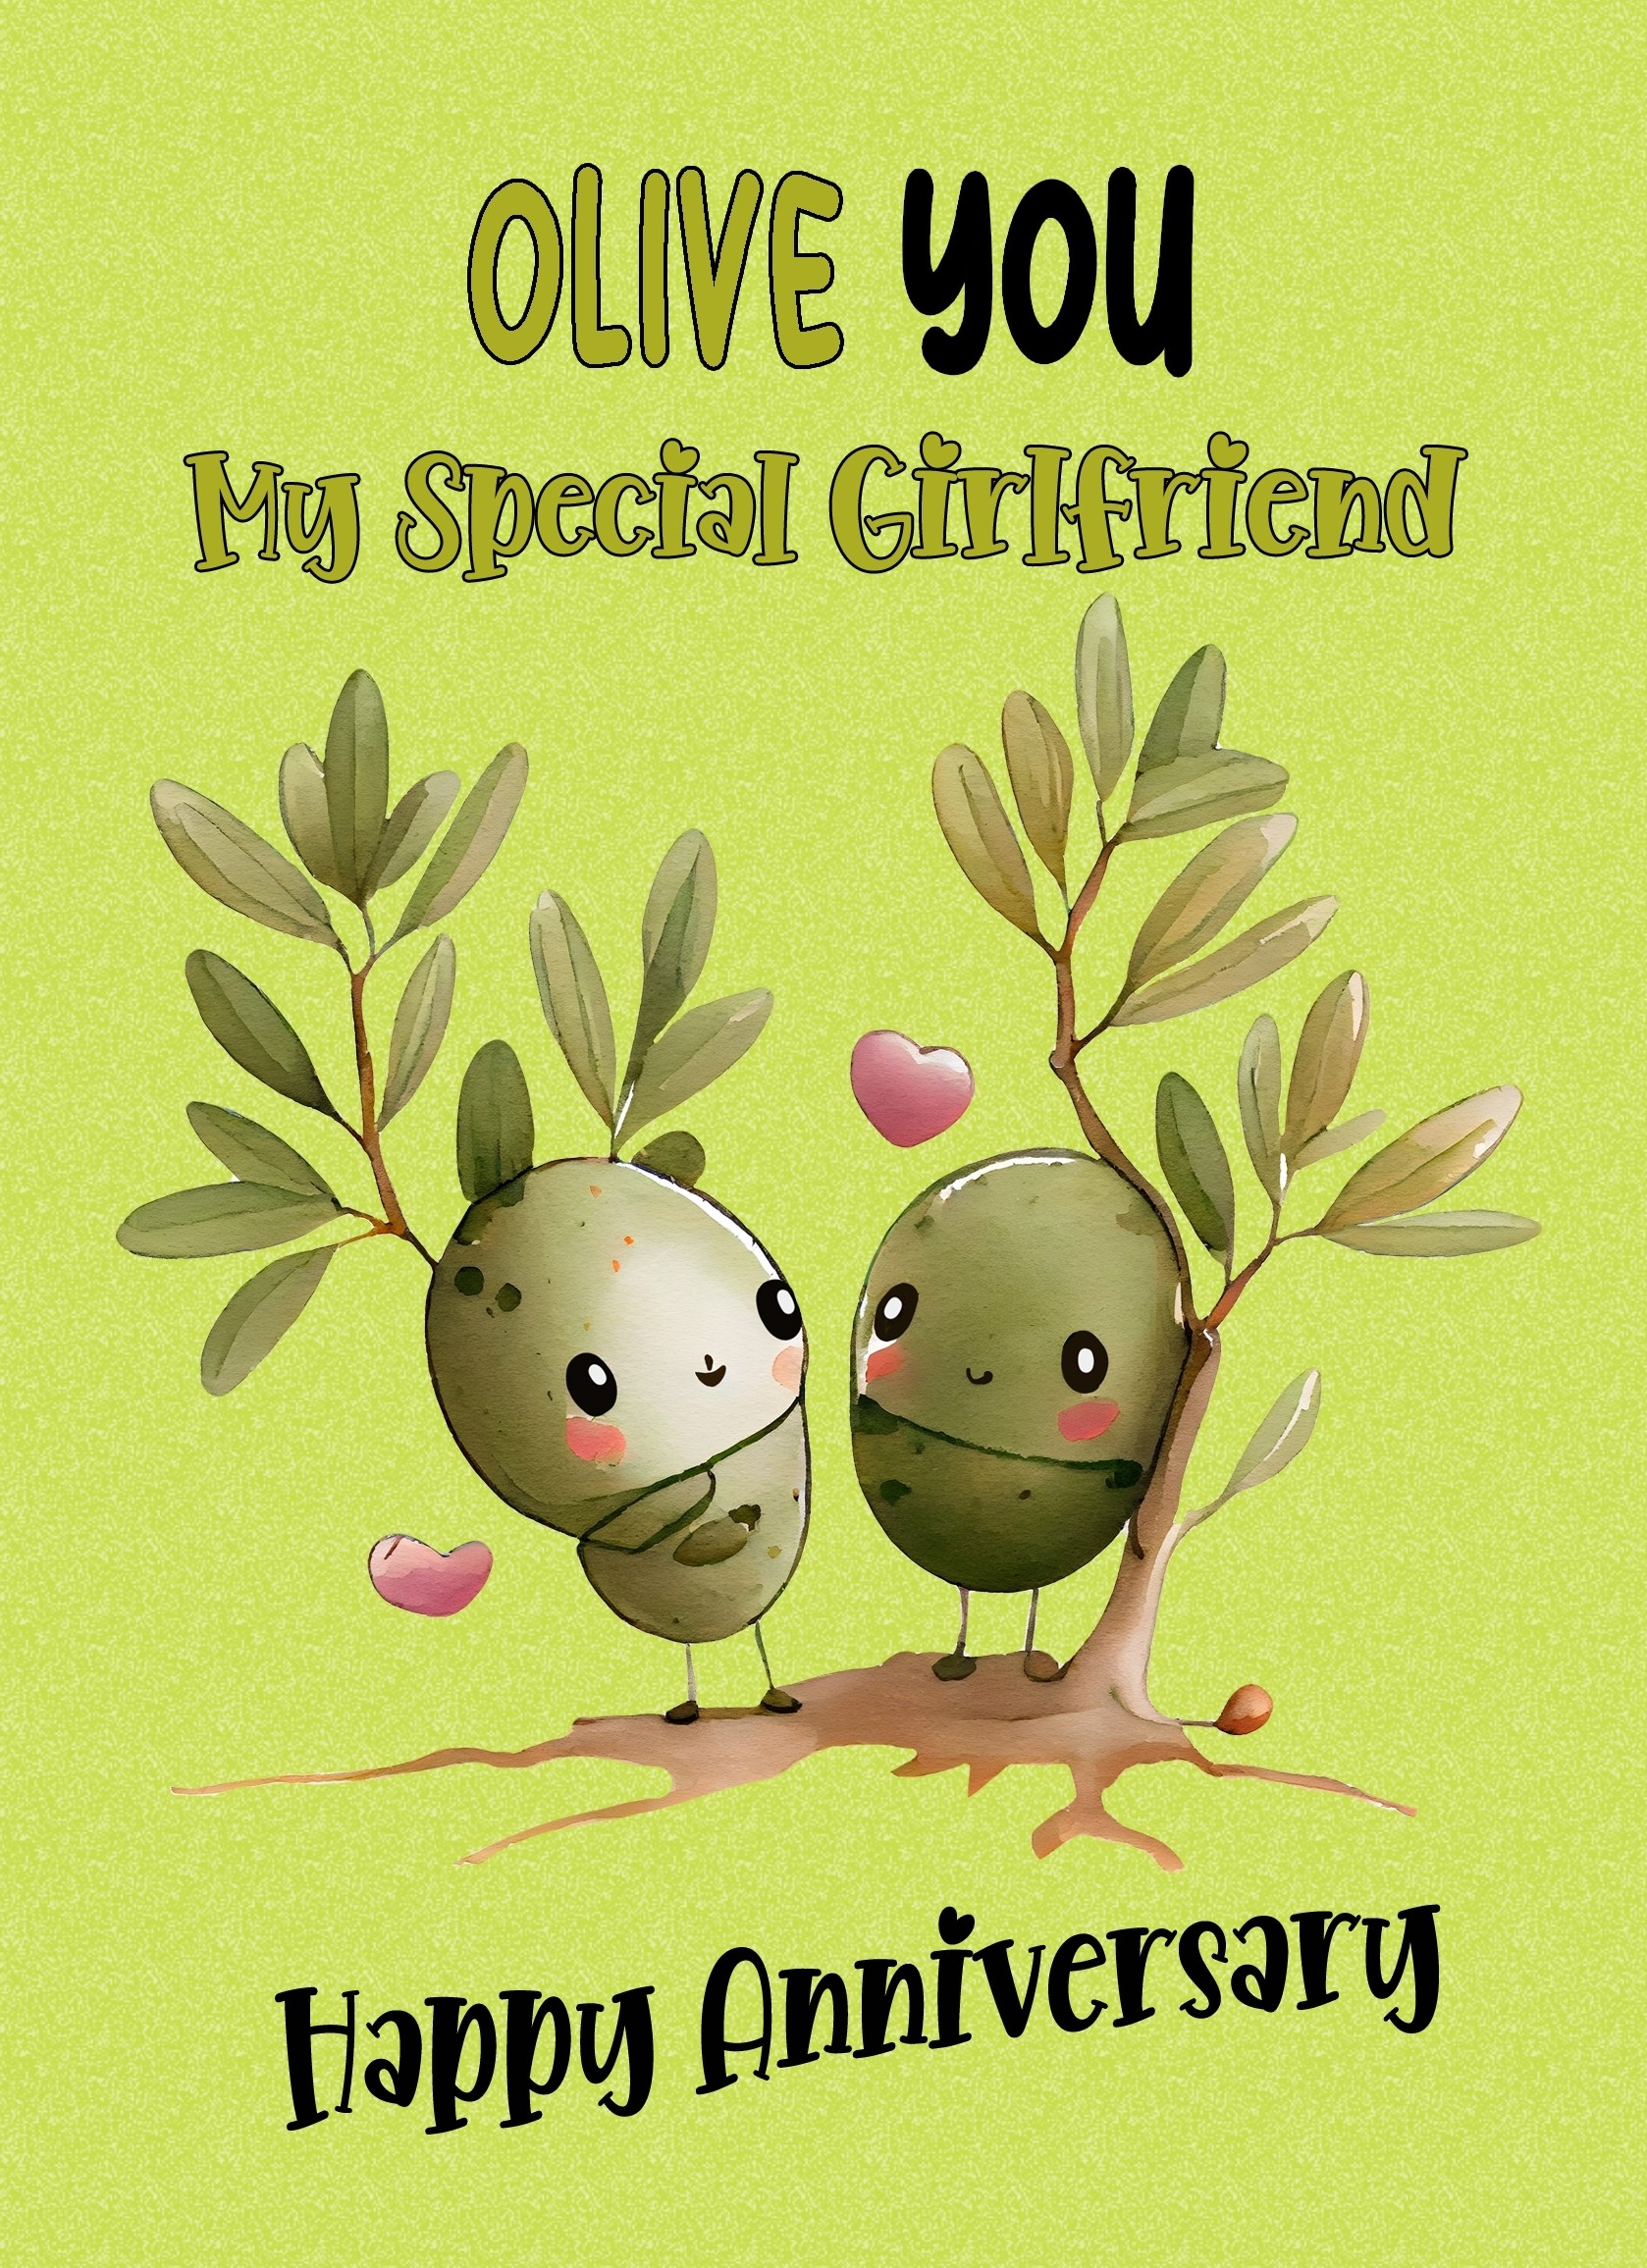 Funny Pun Romantic Anniversary Card for Girlfriend (Olive You)